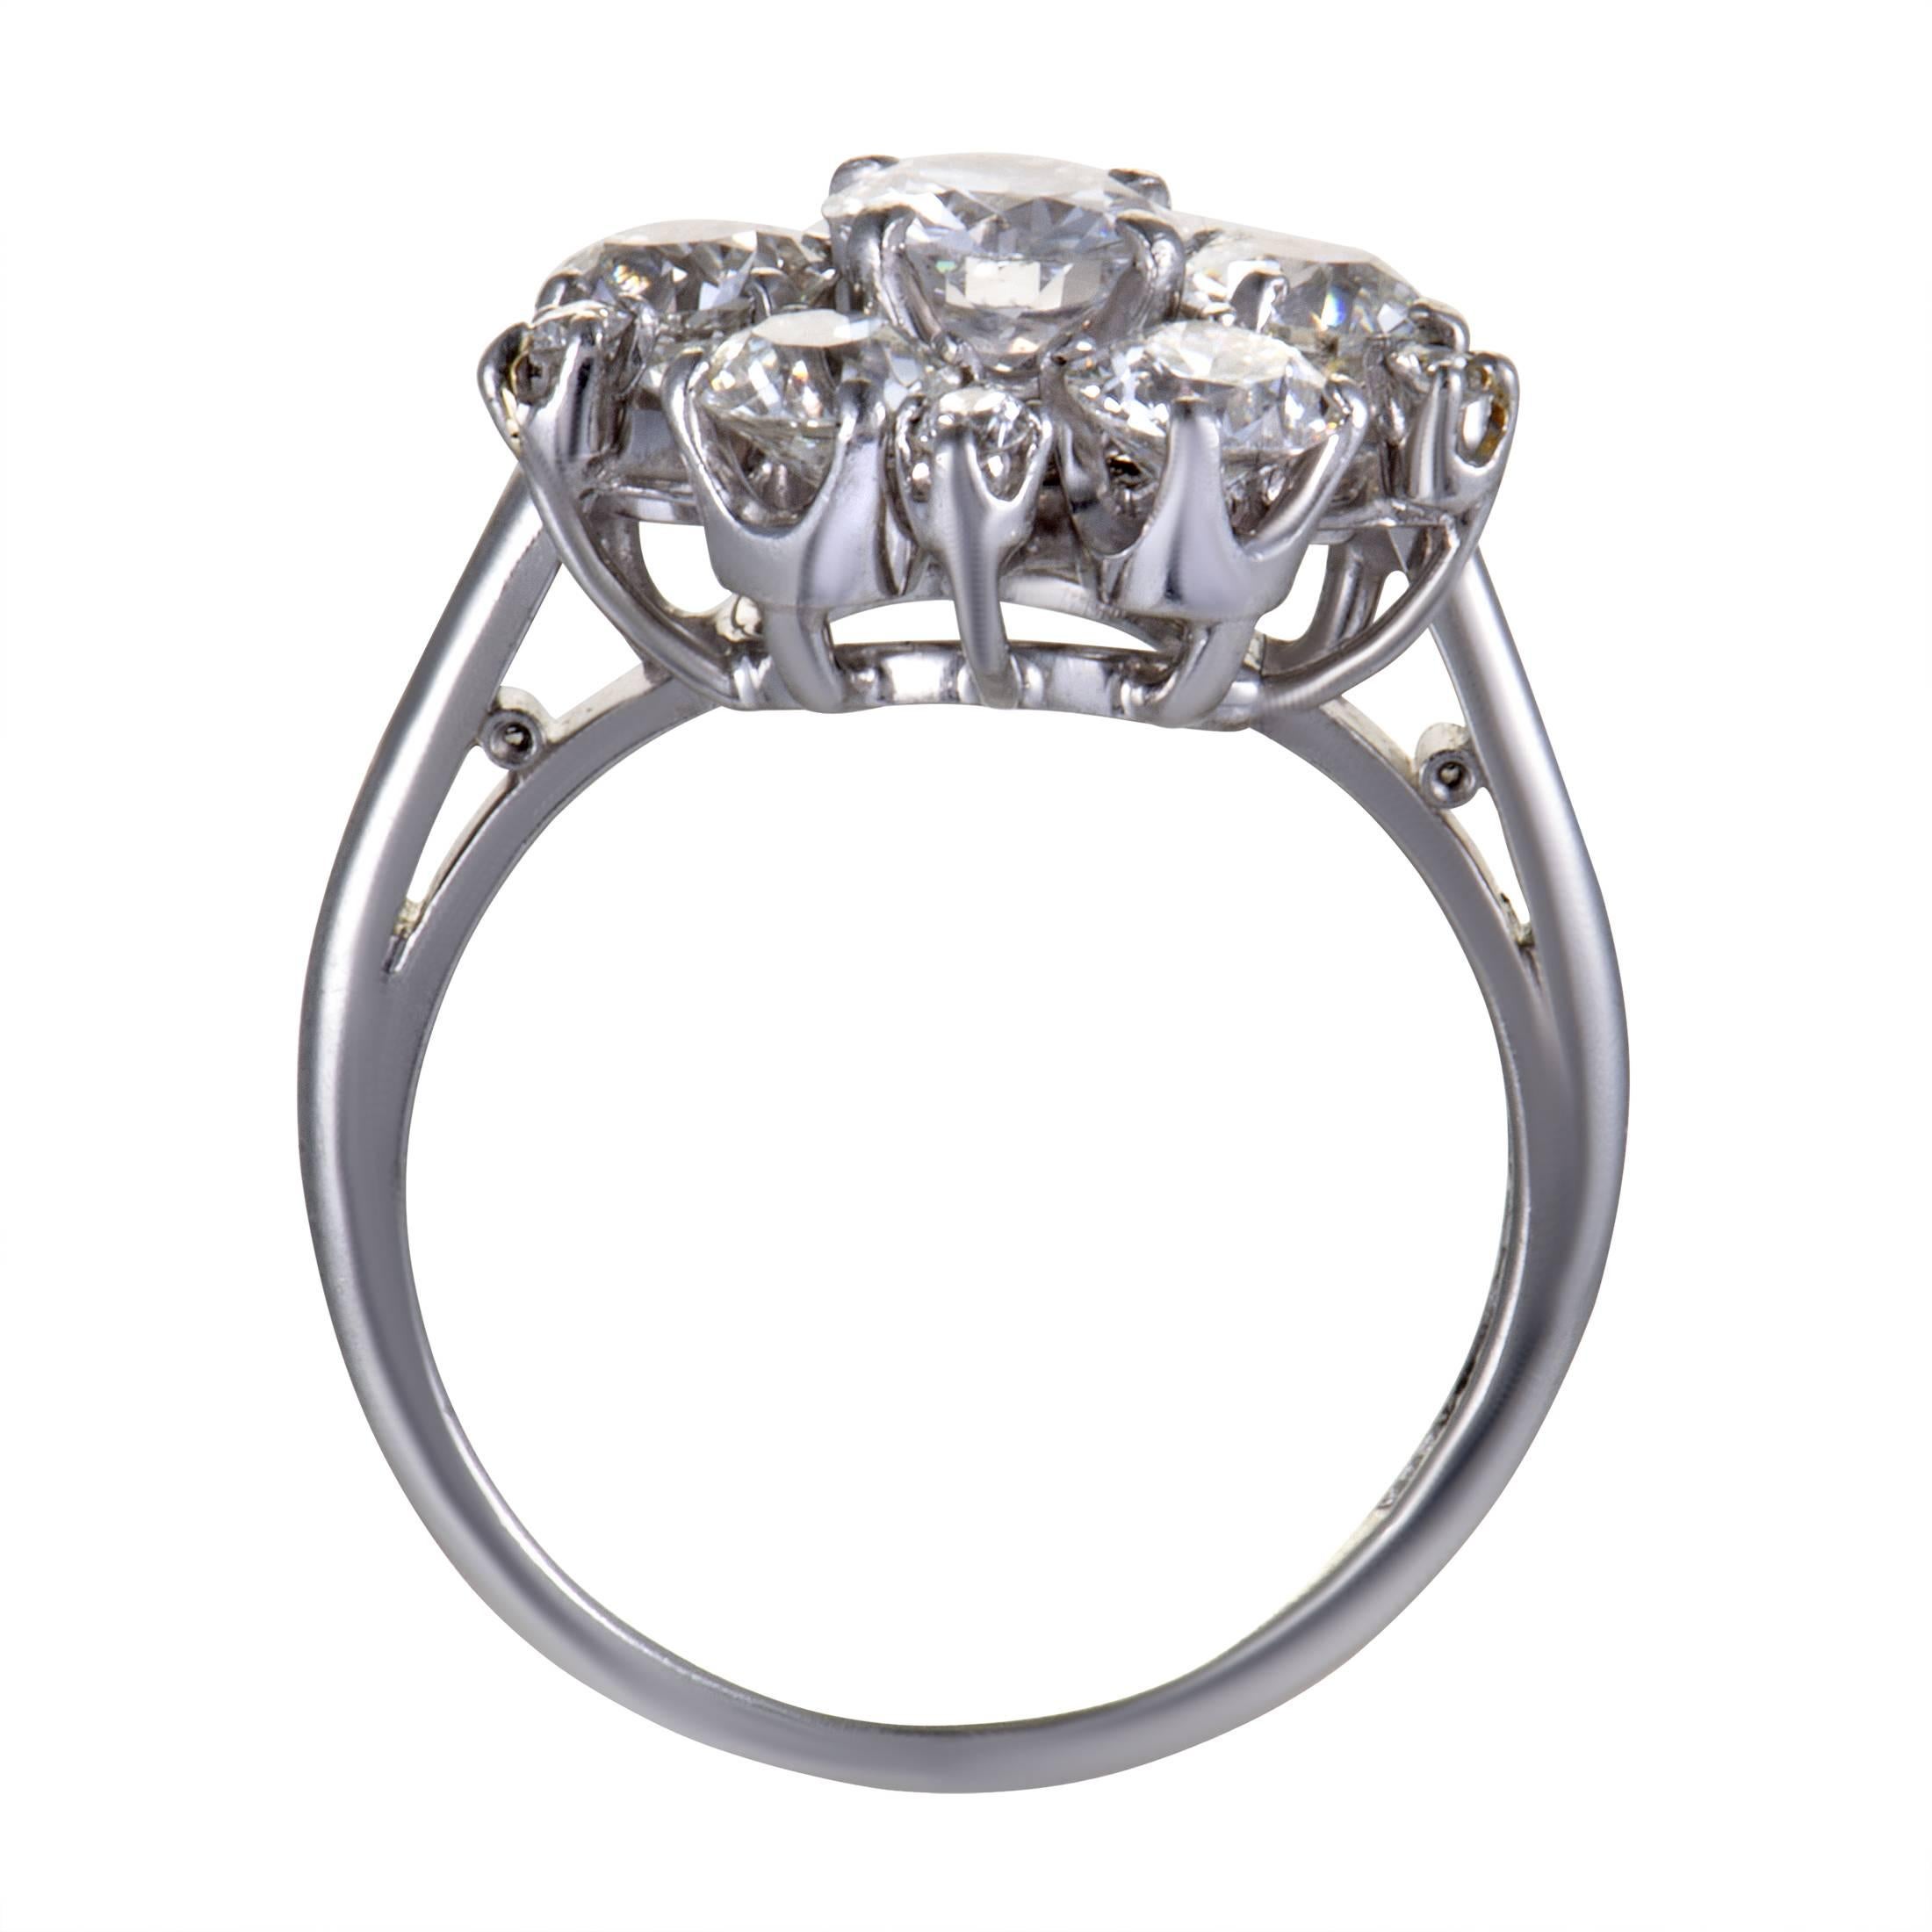 Reminiscent of a sparkly snowflake with its coolly gleaming platinum body and magnificent diamond-setting, this antique ring boasts a wonderfully extravagant appeal. The ring weighs 7.5 grams and the diamonds total approximately 2.20 carats.
Ring